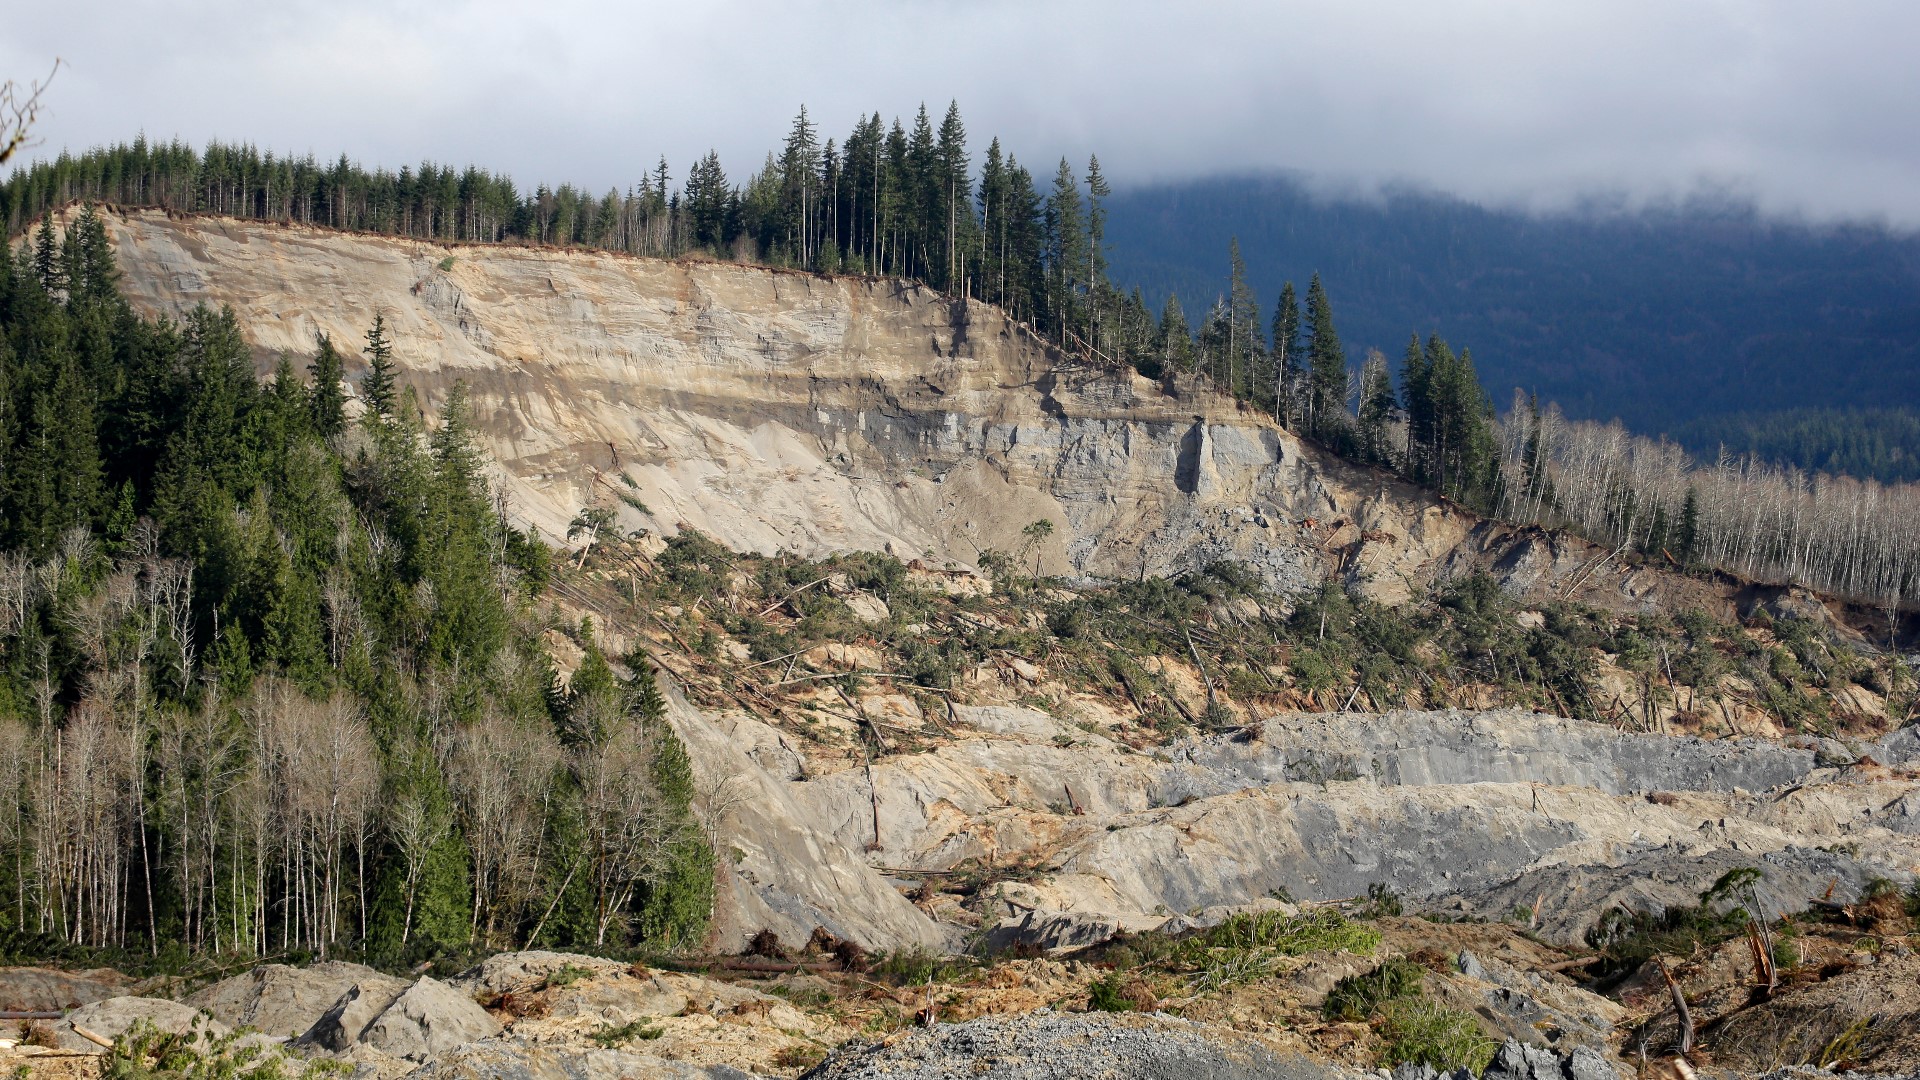 Washington's Sen. Cantwell and Rep. Suzan DelBene introduced the National Landslide Preparedness Act in November 2020, now it's up for reauthorization.